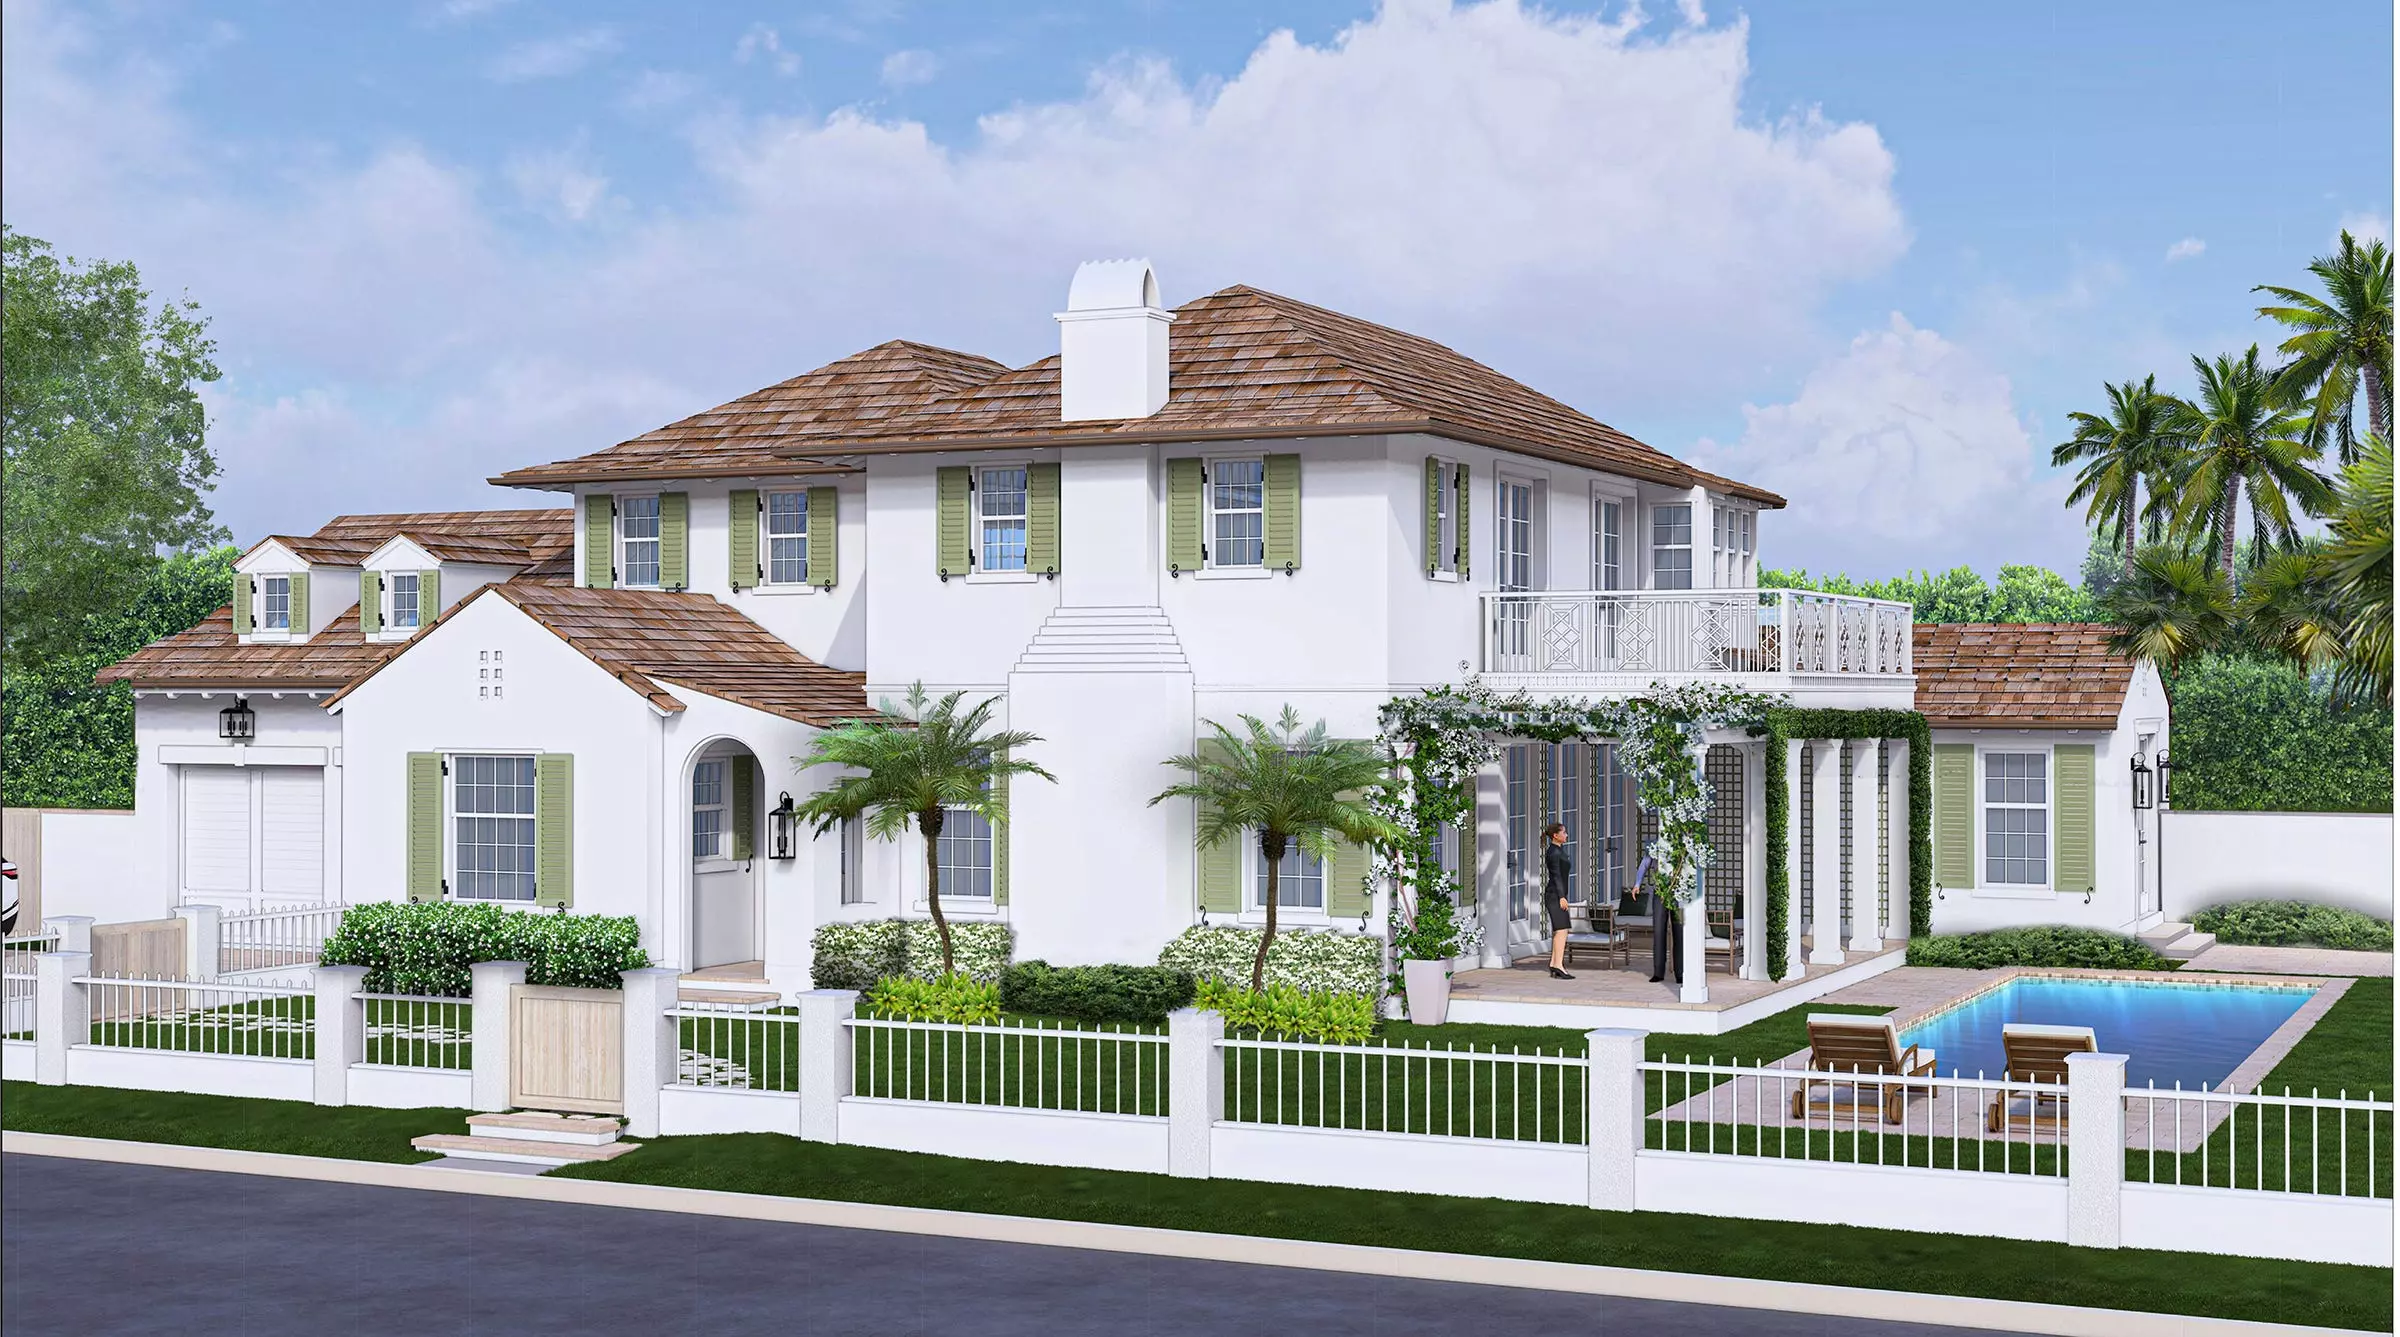 In August 2023, the Palm Beach Architectural Commission asked for a significant restudy of a house, depicted in this rendering, designed for Jim and Sara McCann to replace their existing home at 217 Bahama Lane.